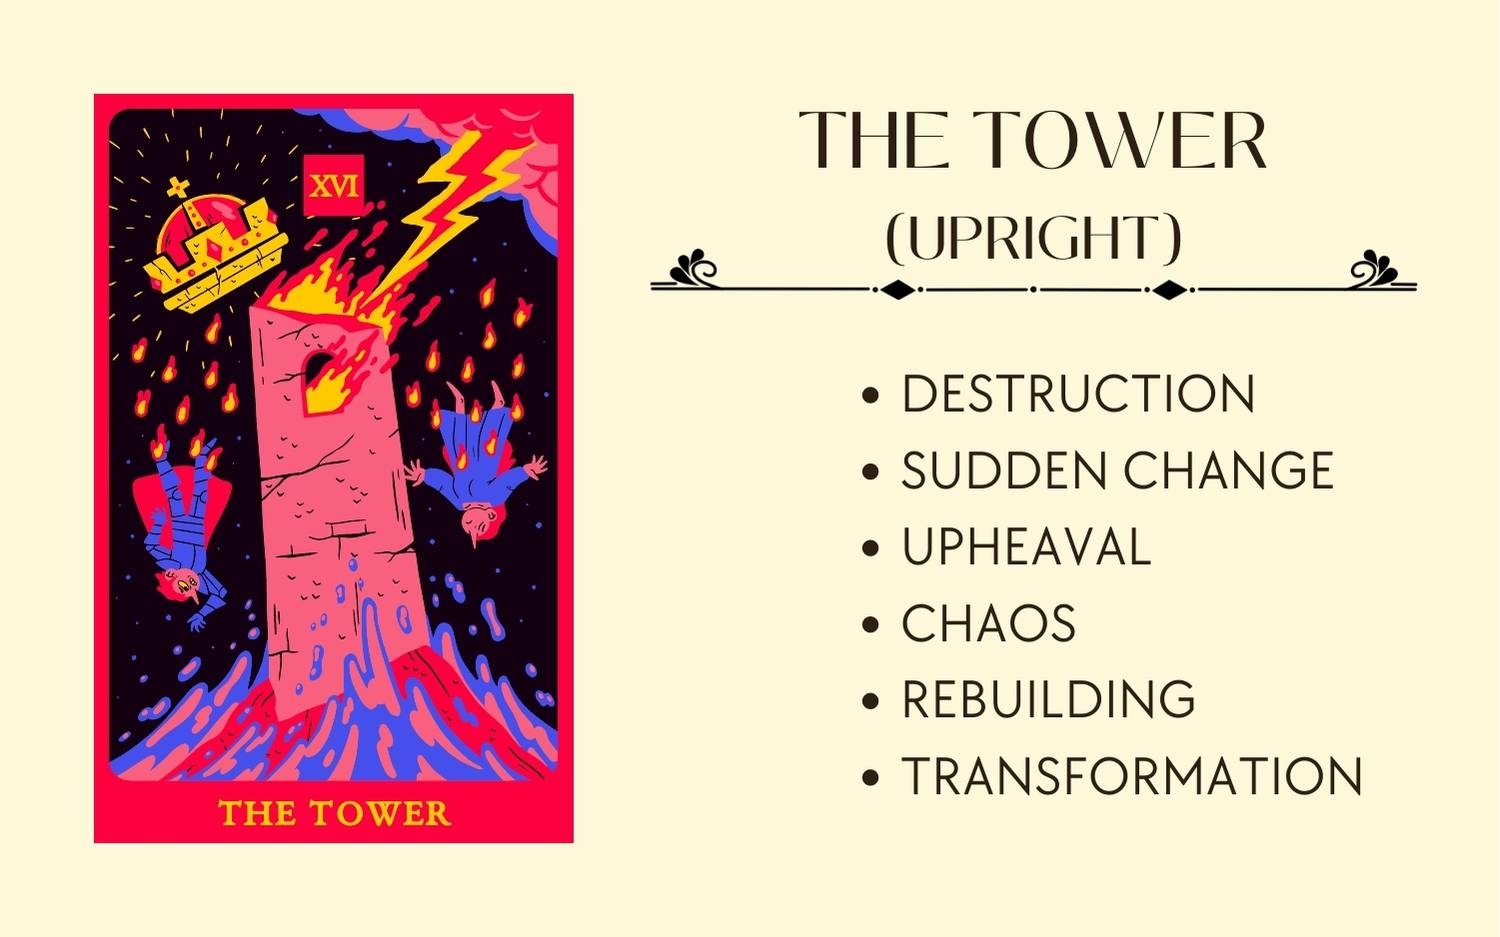 The Tower Upright Keywords